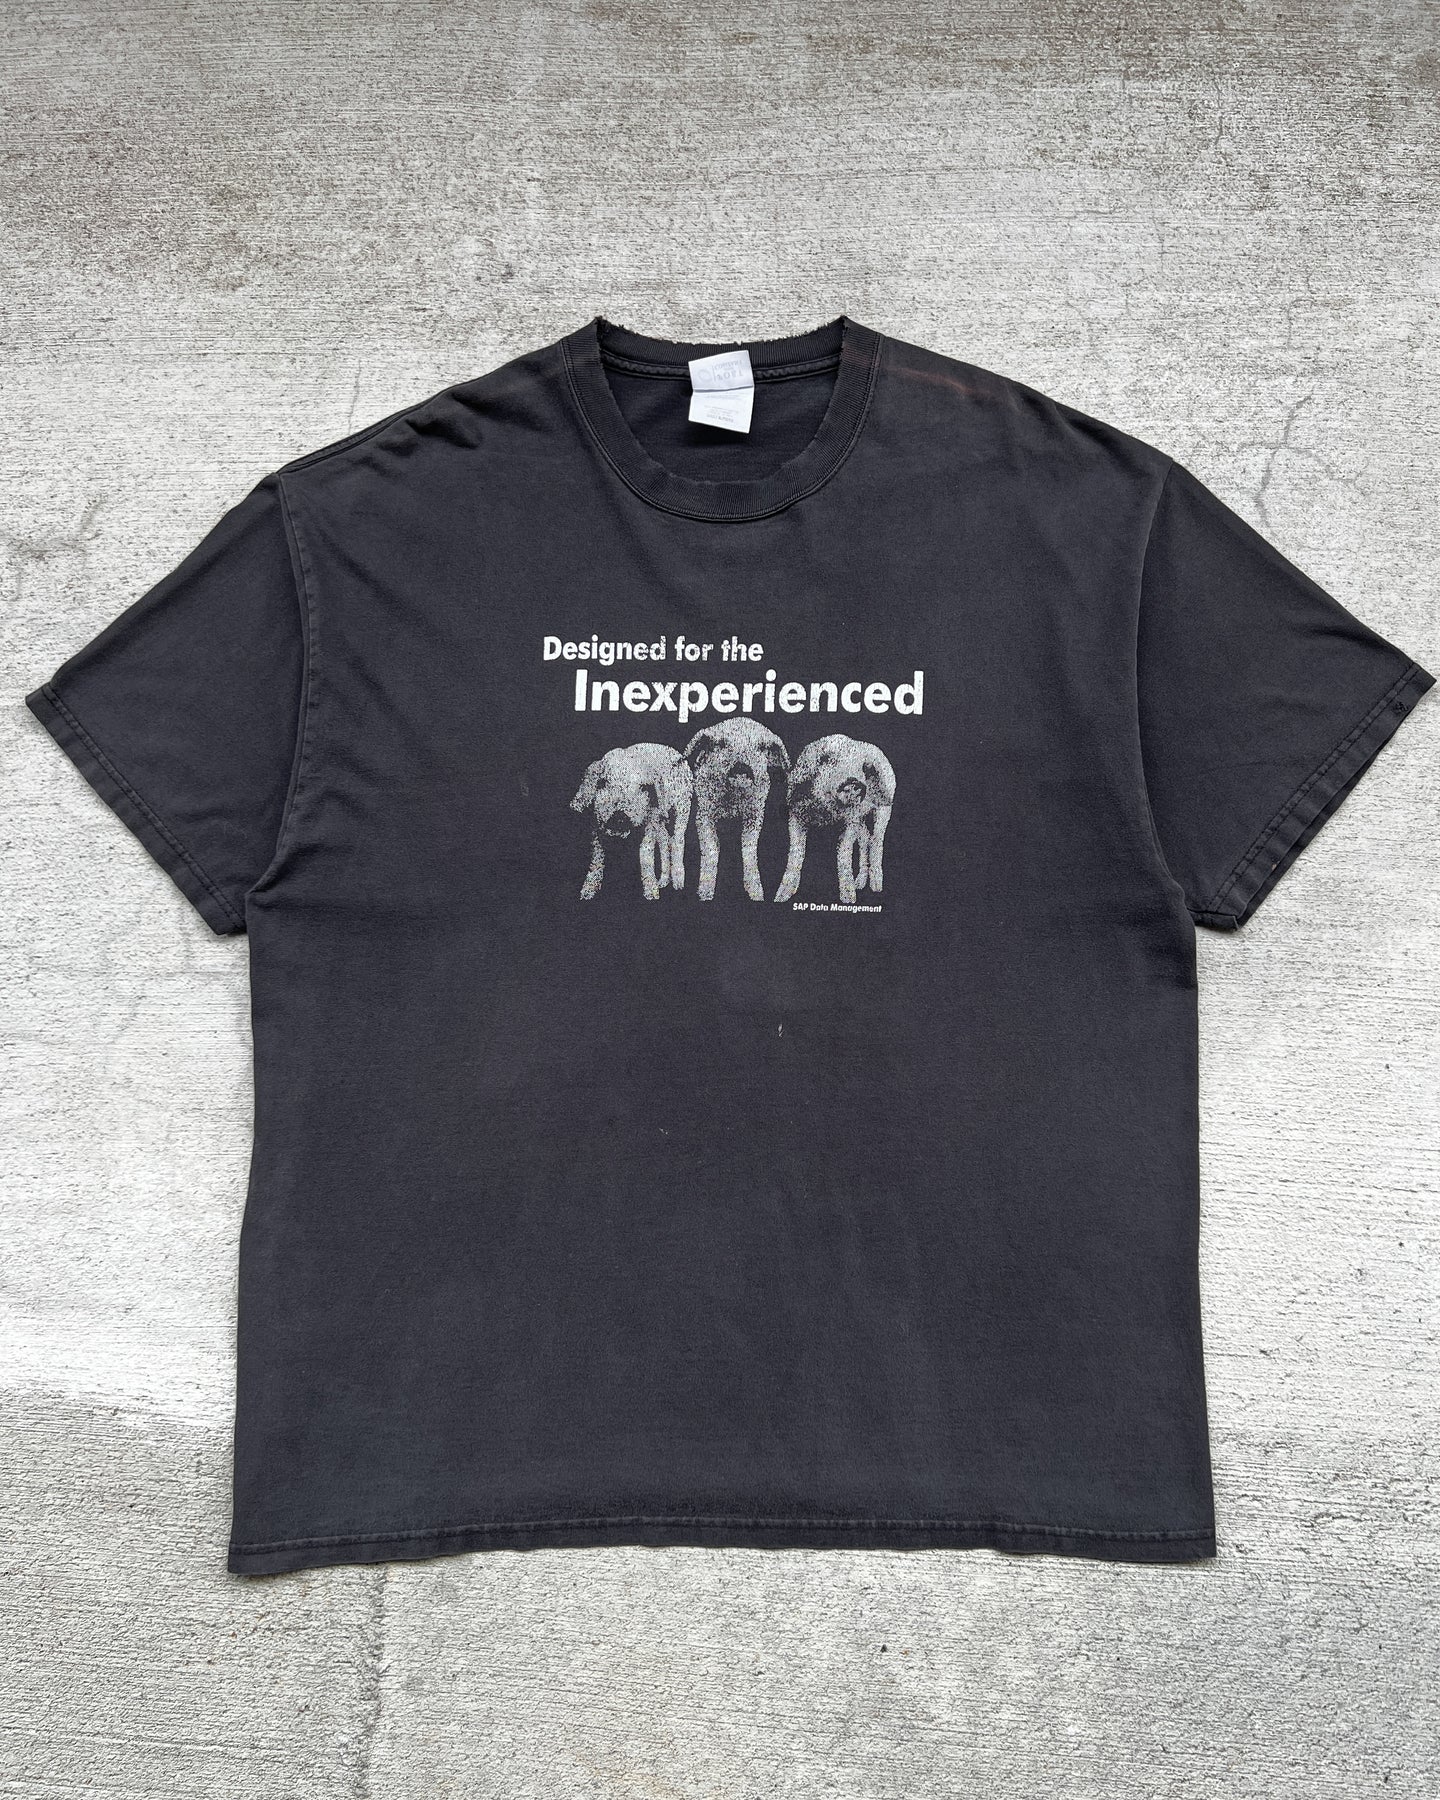 2000s Designed for the Inexperienced Tee - Size X-Large